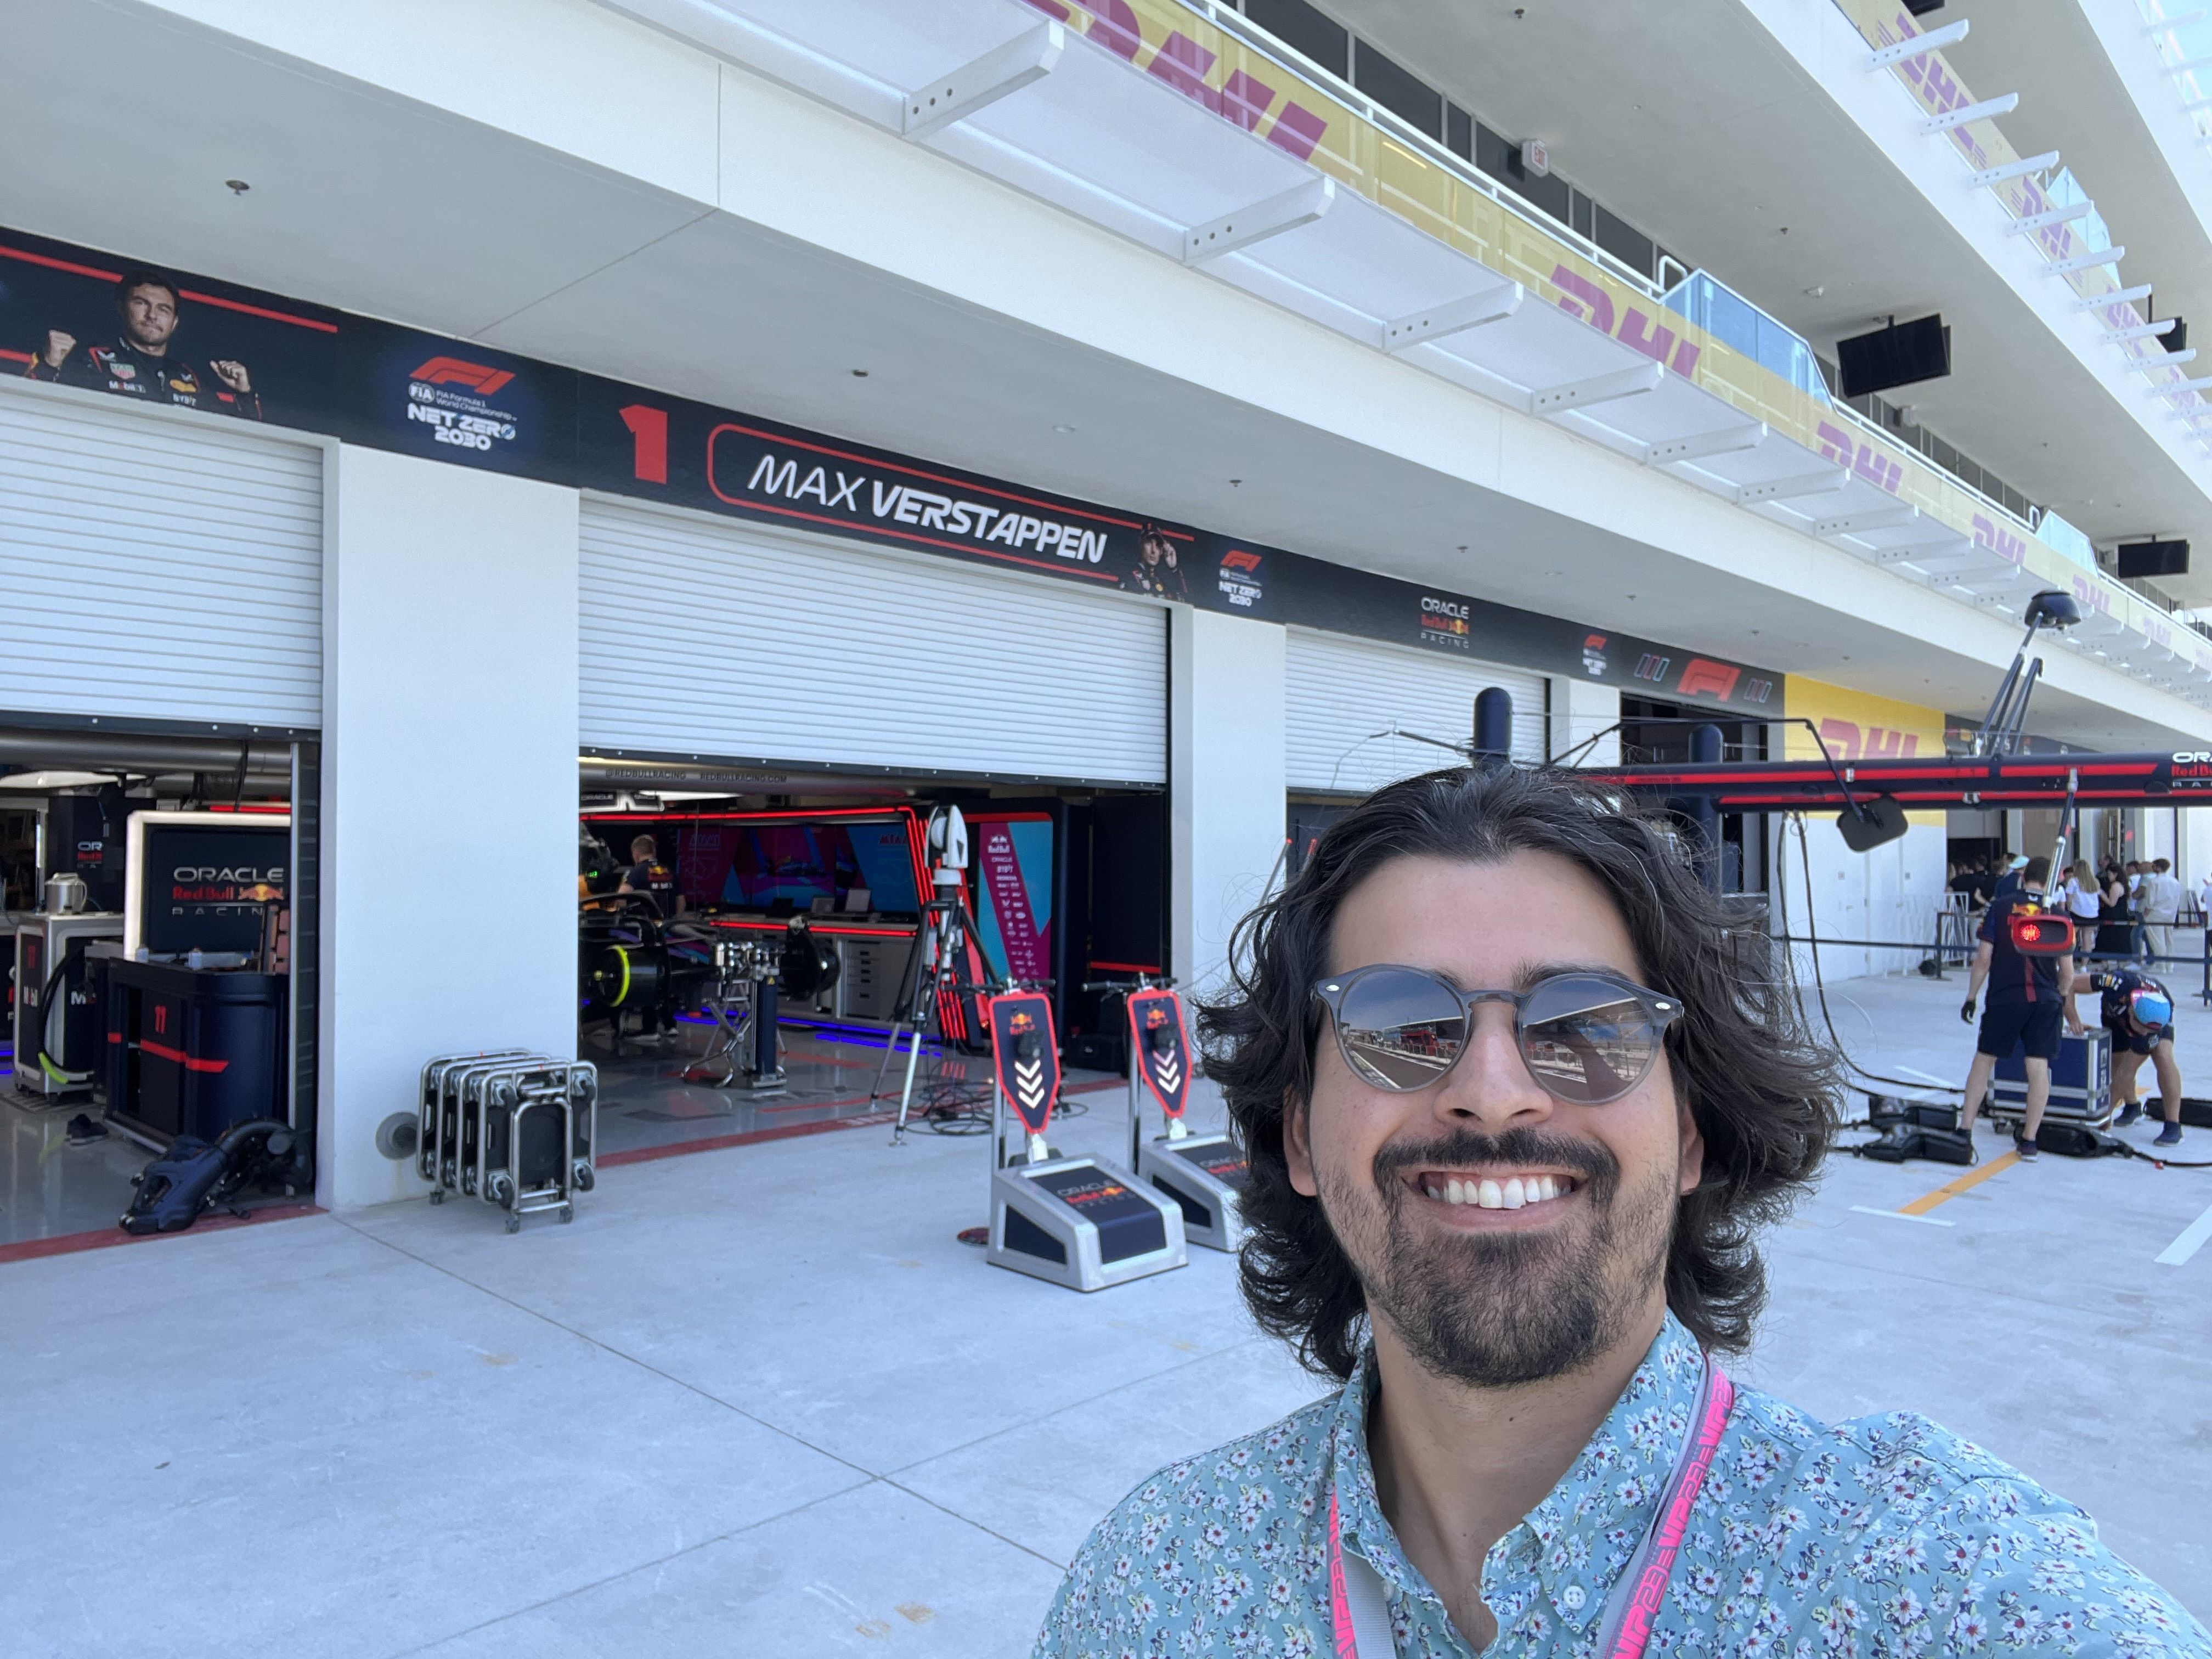 Axios reporter Martin Vassolo takes a selfie in the Red Bull pit lane.